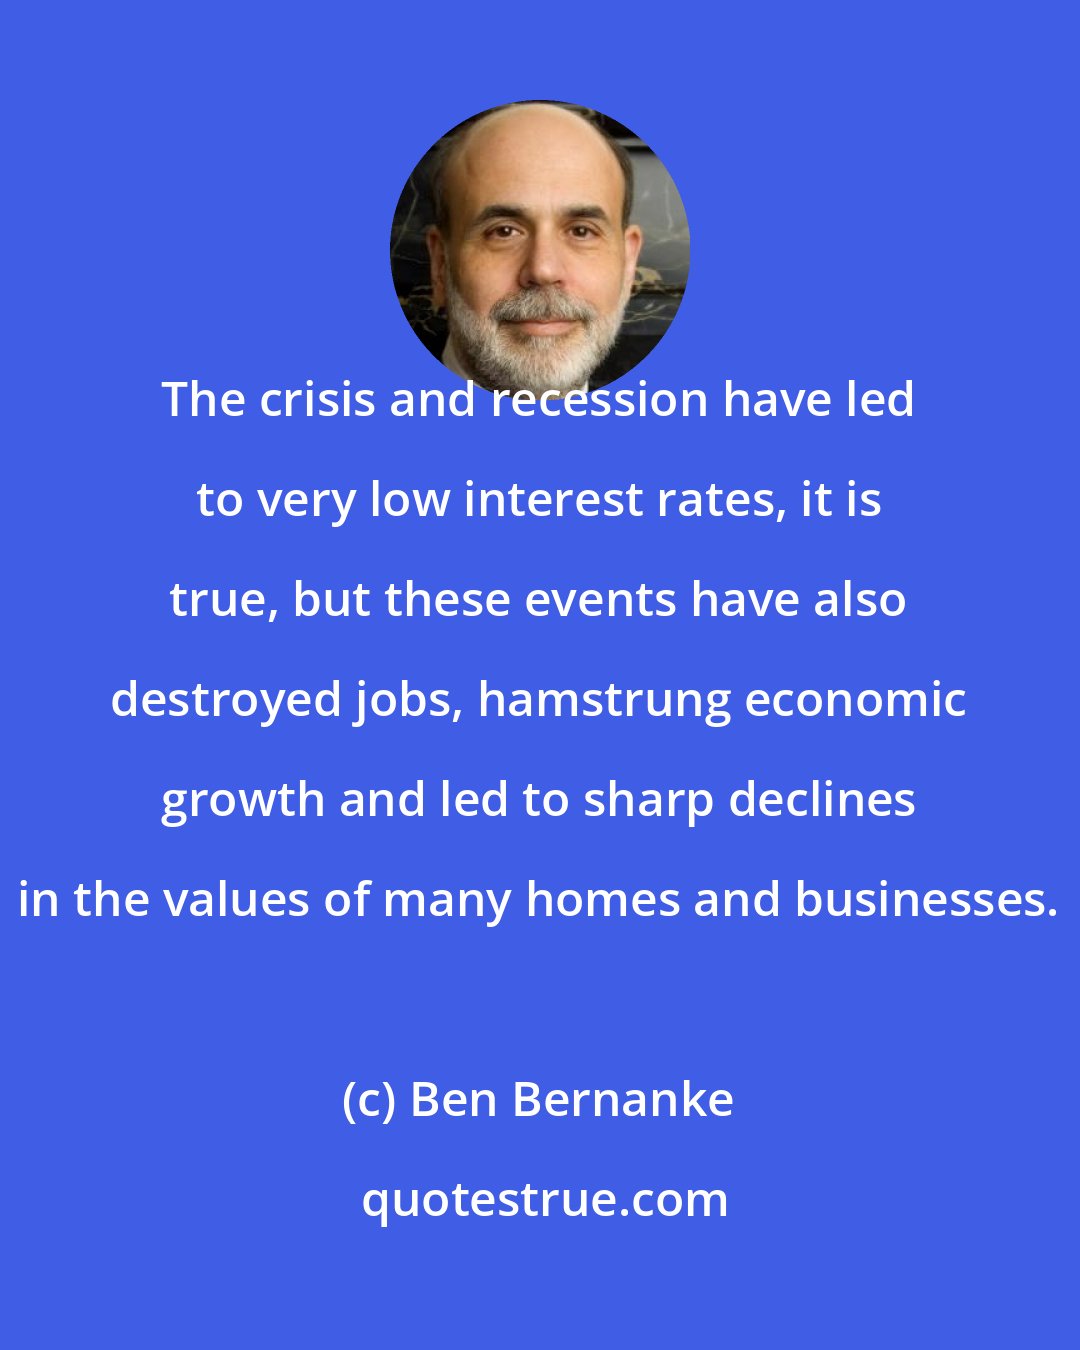 Ben Bernanke: The crisis and recession have led to very low interest rates, it is true, but these events have also destroyed jobs, hamstrung economic growth and led to sharp declines in the values of many homes and businesses.